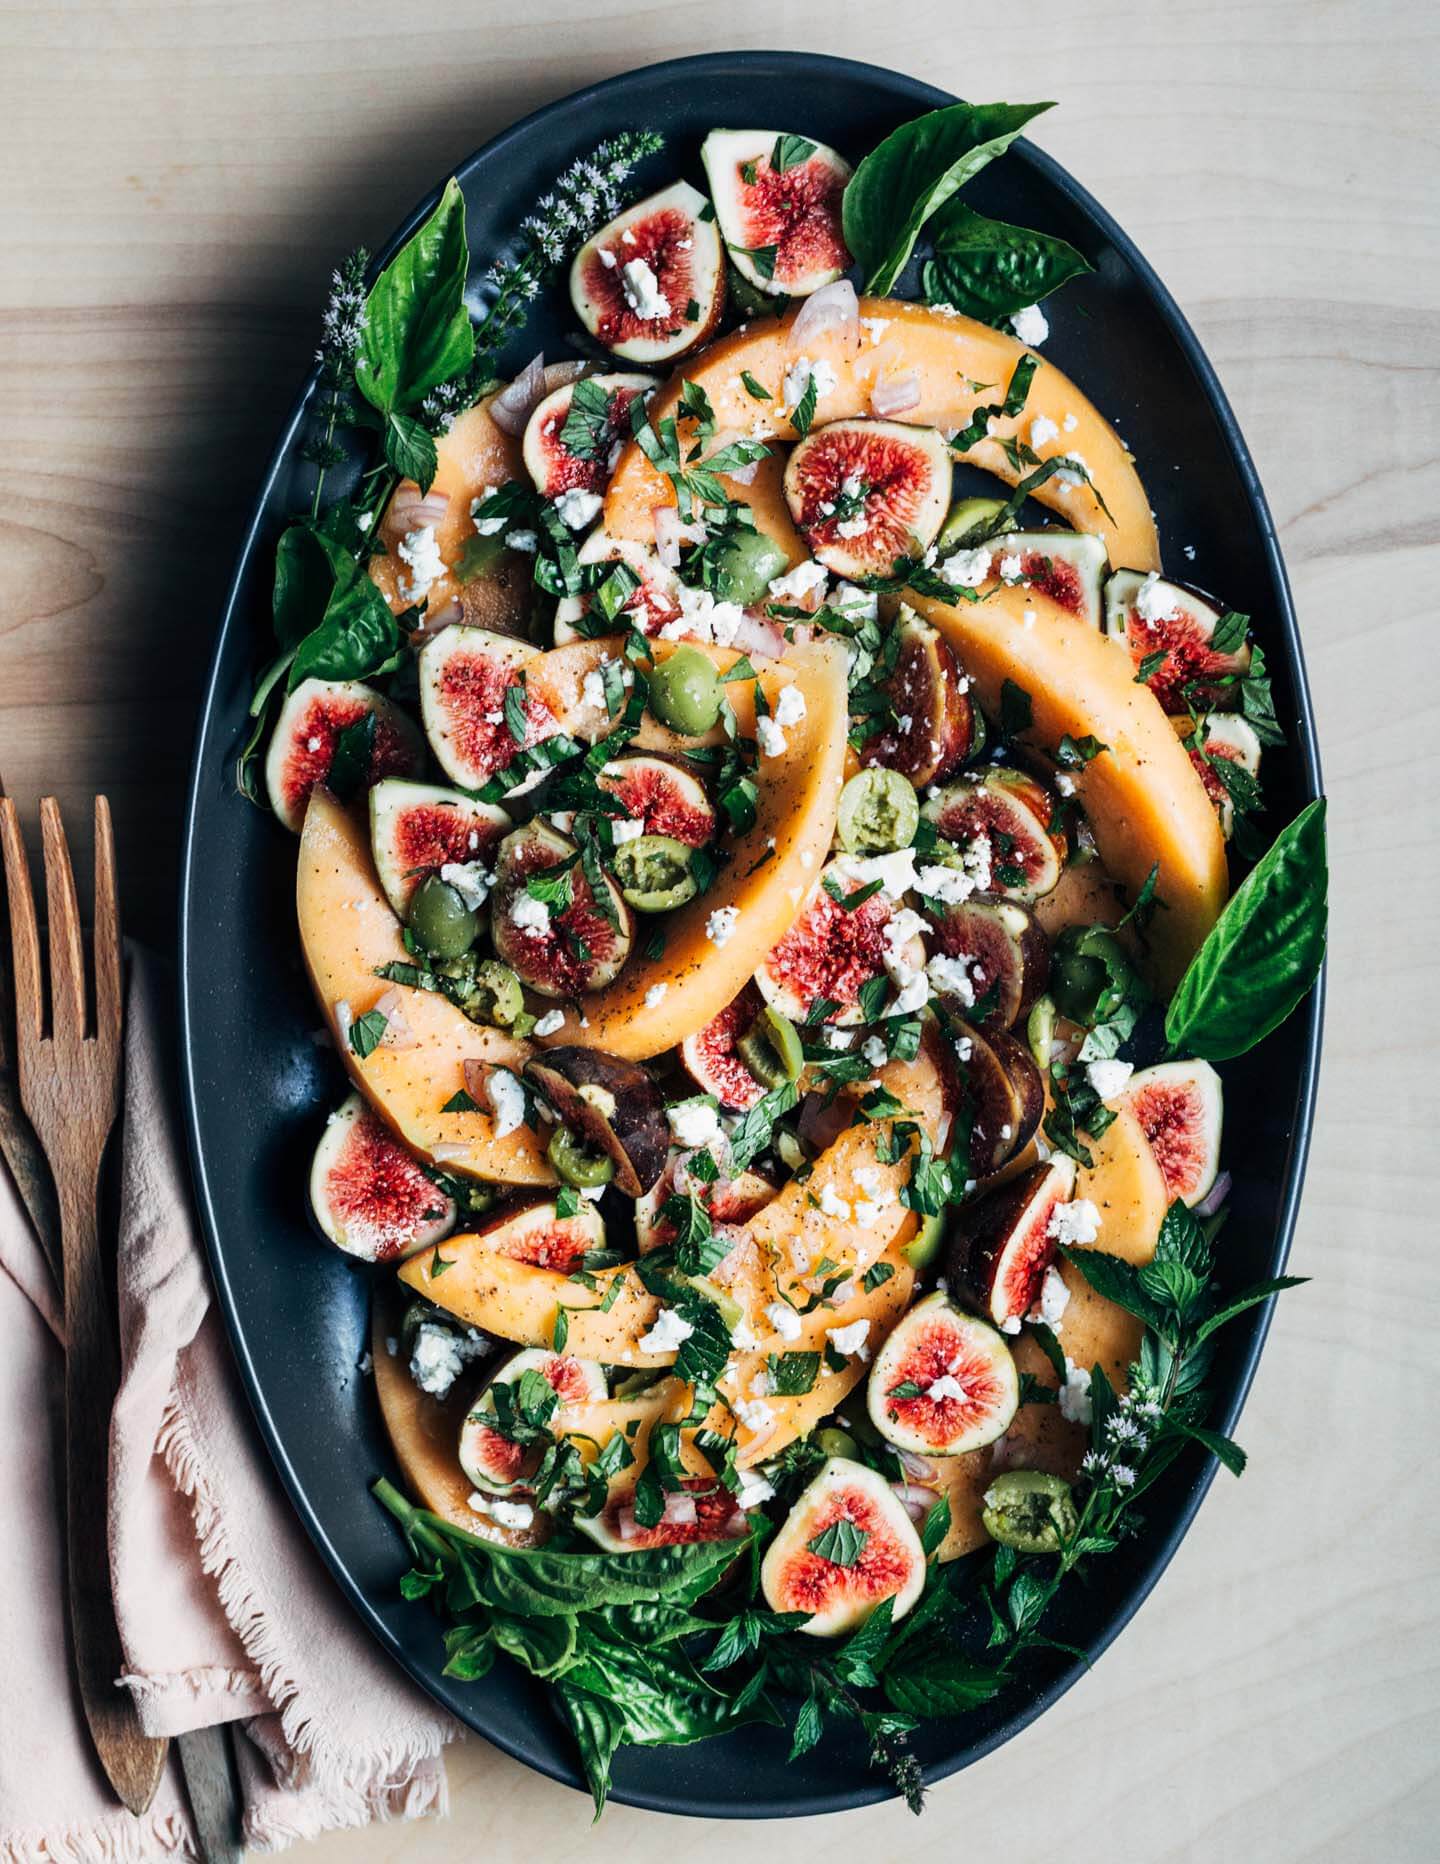 A large platter with cantaloupe, figs, feta, olives, and herbs.